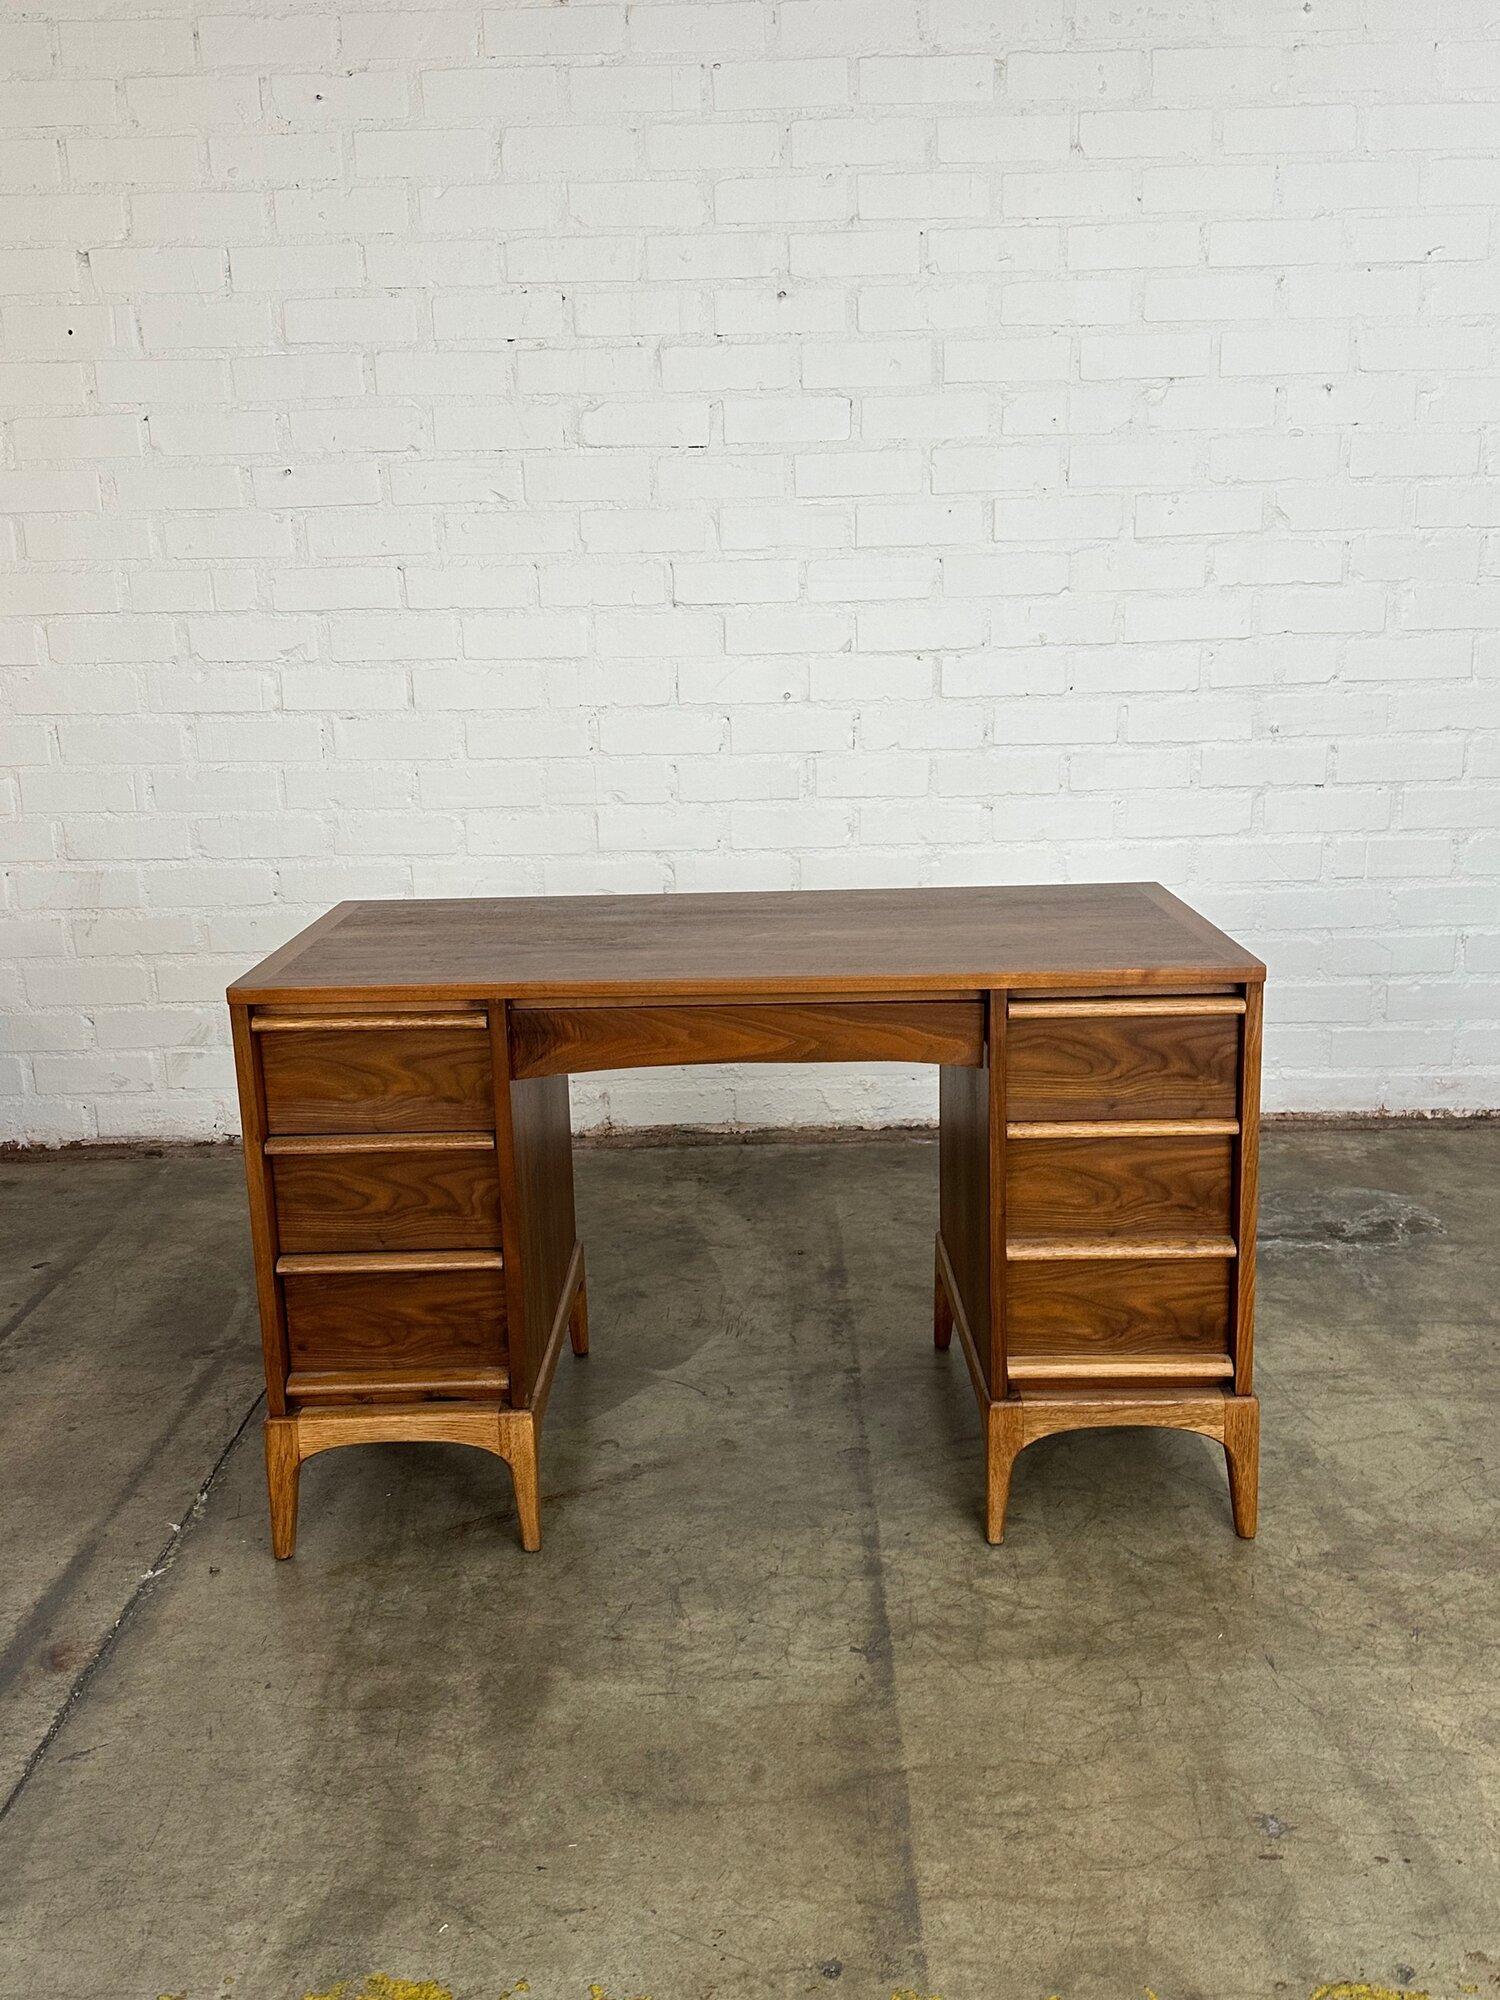 W48 D23 H29 KC25

Mid century two toned sculptural pull desk by Lane. Desk has been fully refinished and is structurally sound.